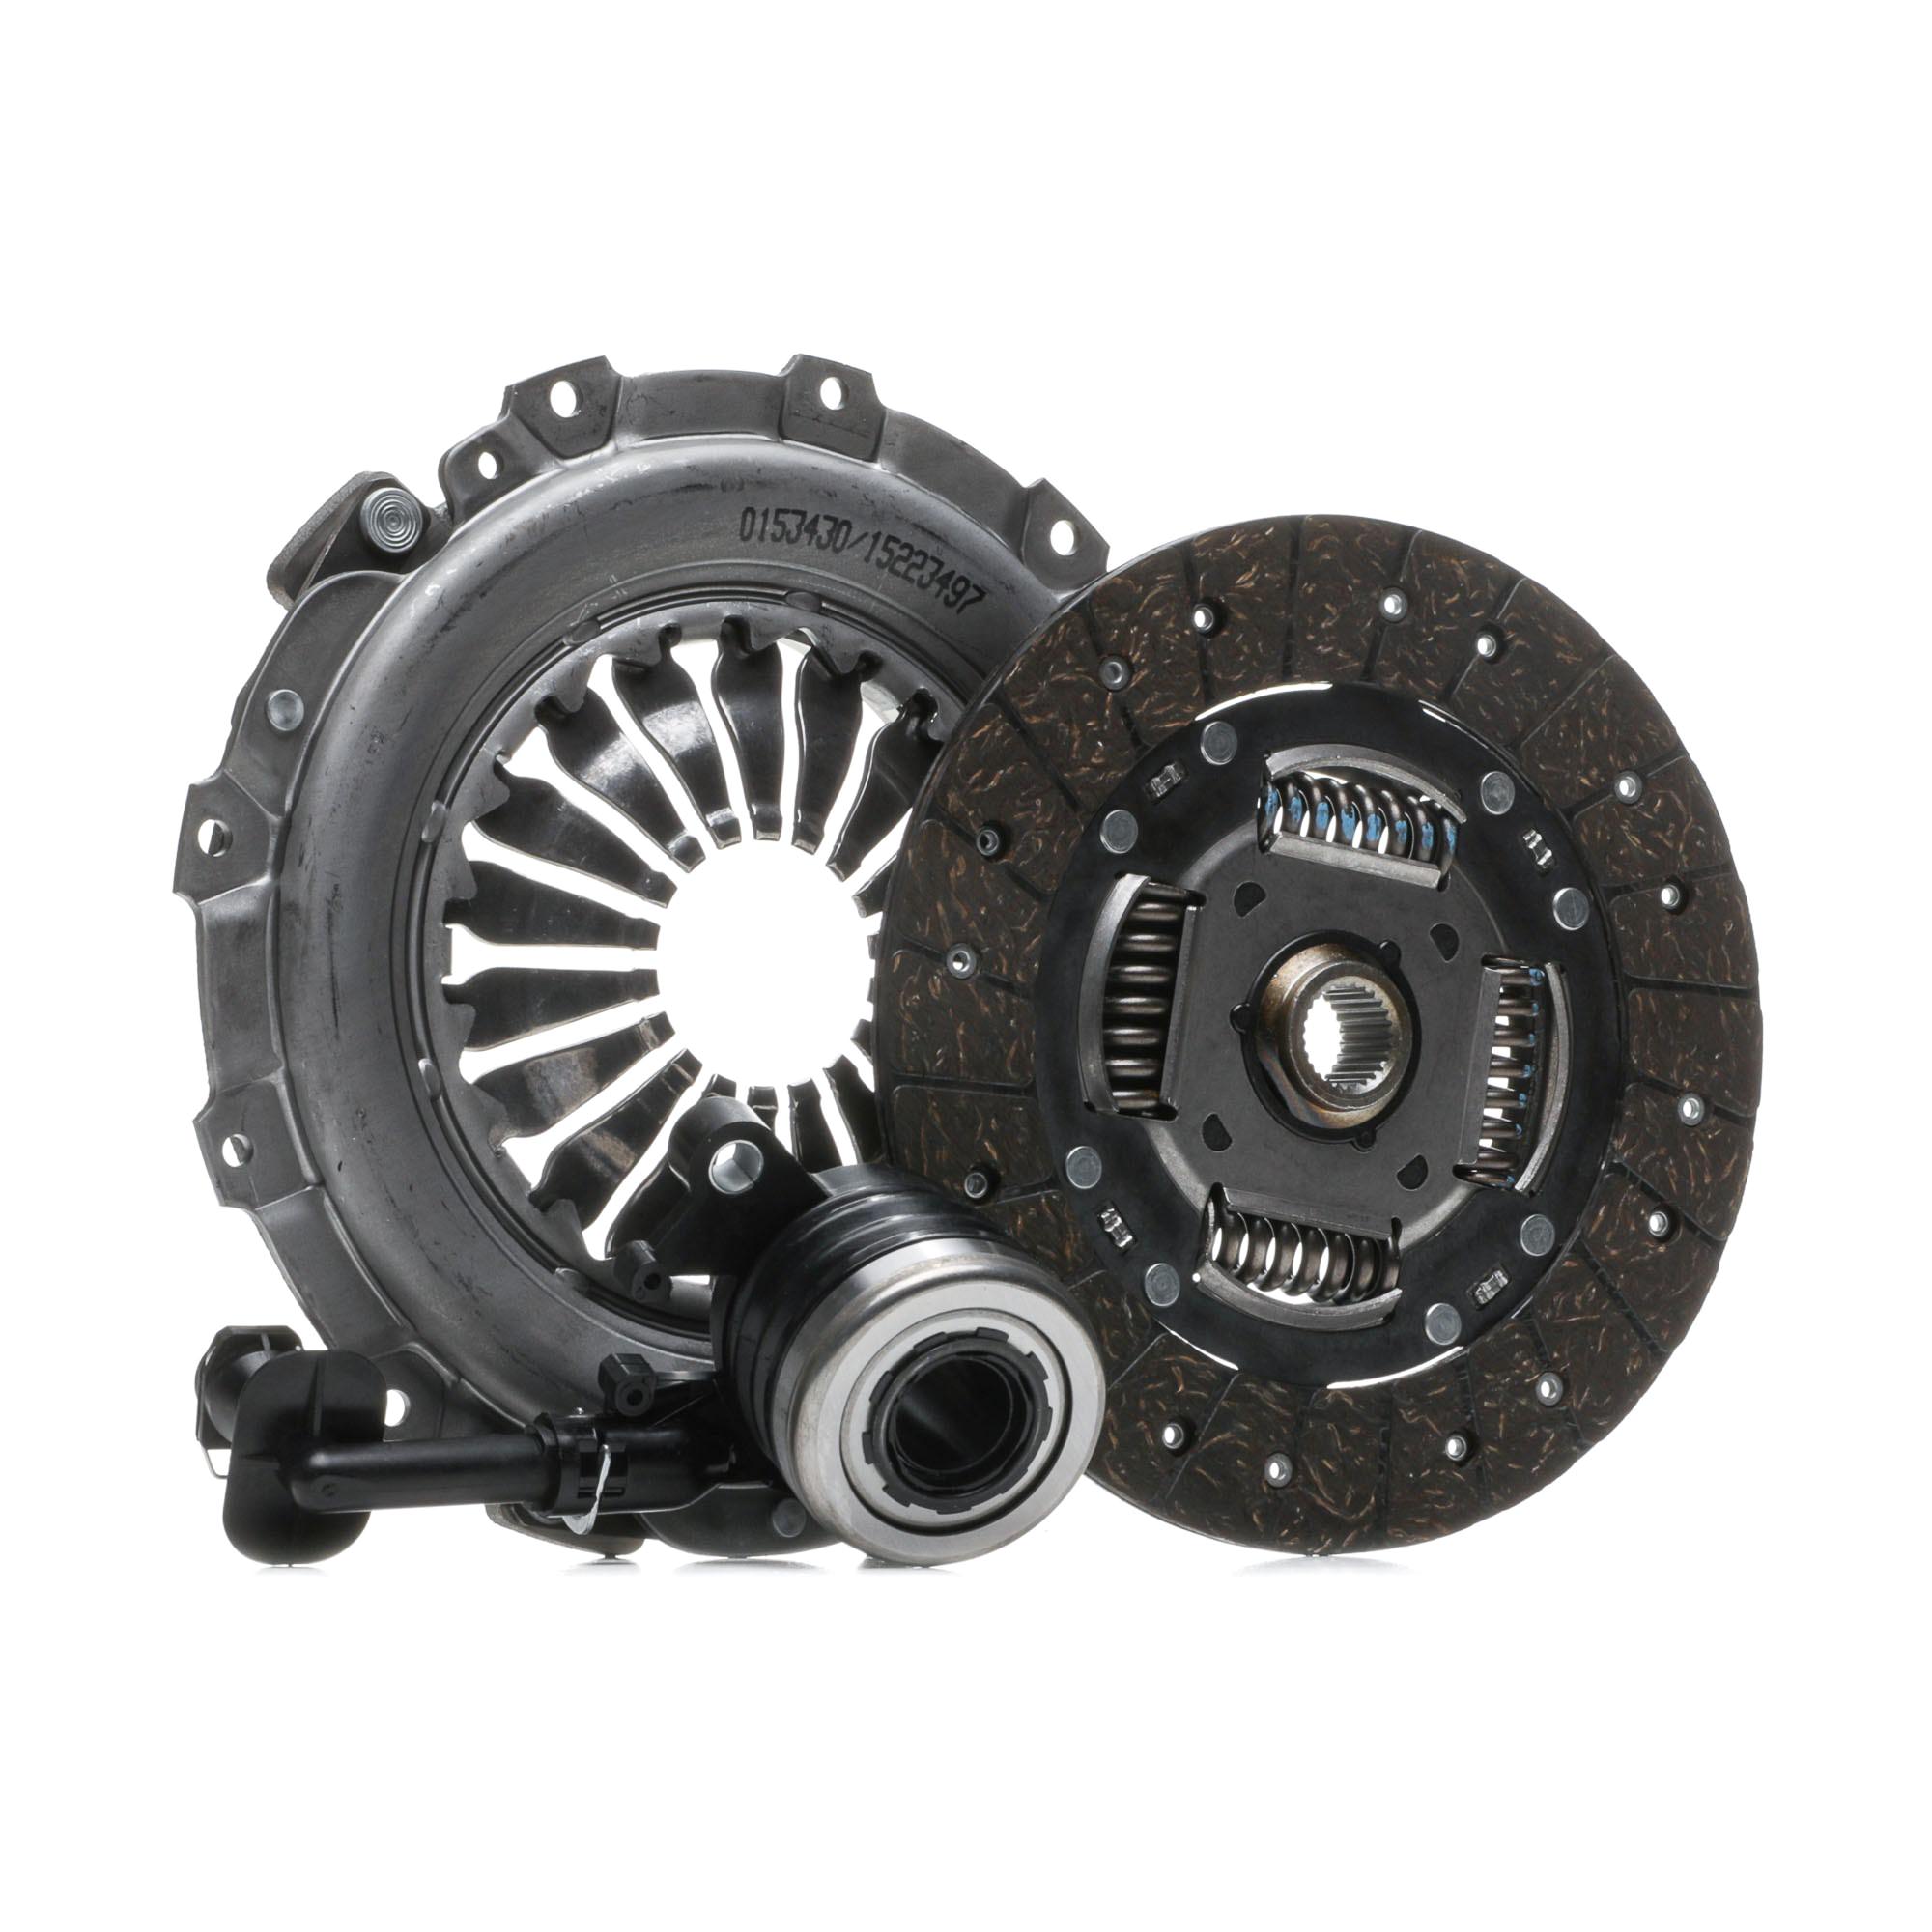 STARK SKCK-0100418 Clutch kit with clutch pressure plate, with central slave cylinder, with clutch disc, 220mm